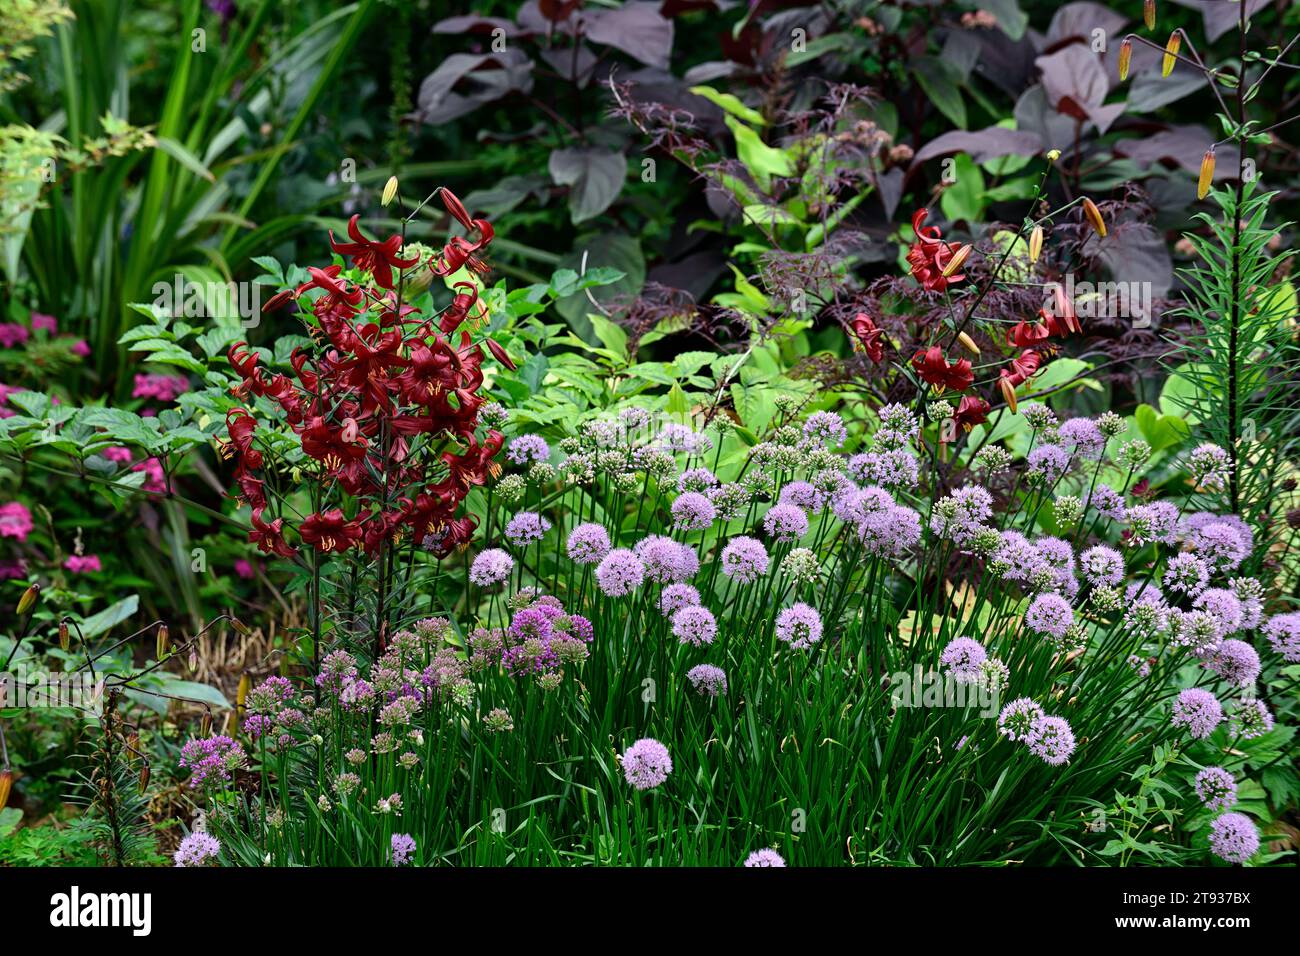 lillium red velvet,allium,lilium and allium,deep red and lilac flower,mixed bed,mixed border,mixed planting scheme,RM Floral Stock Photo